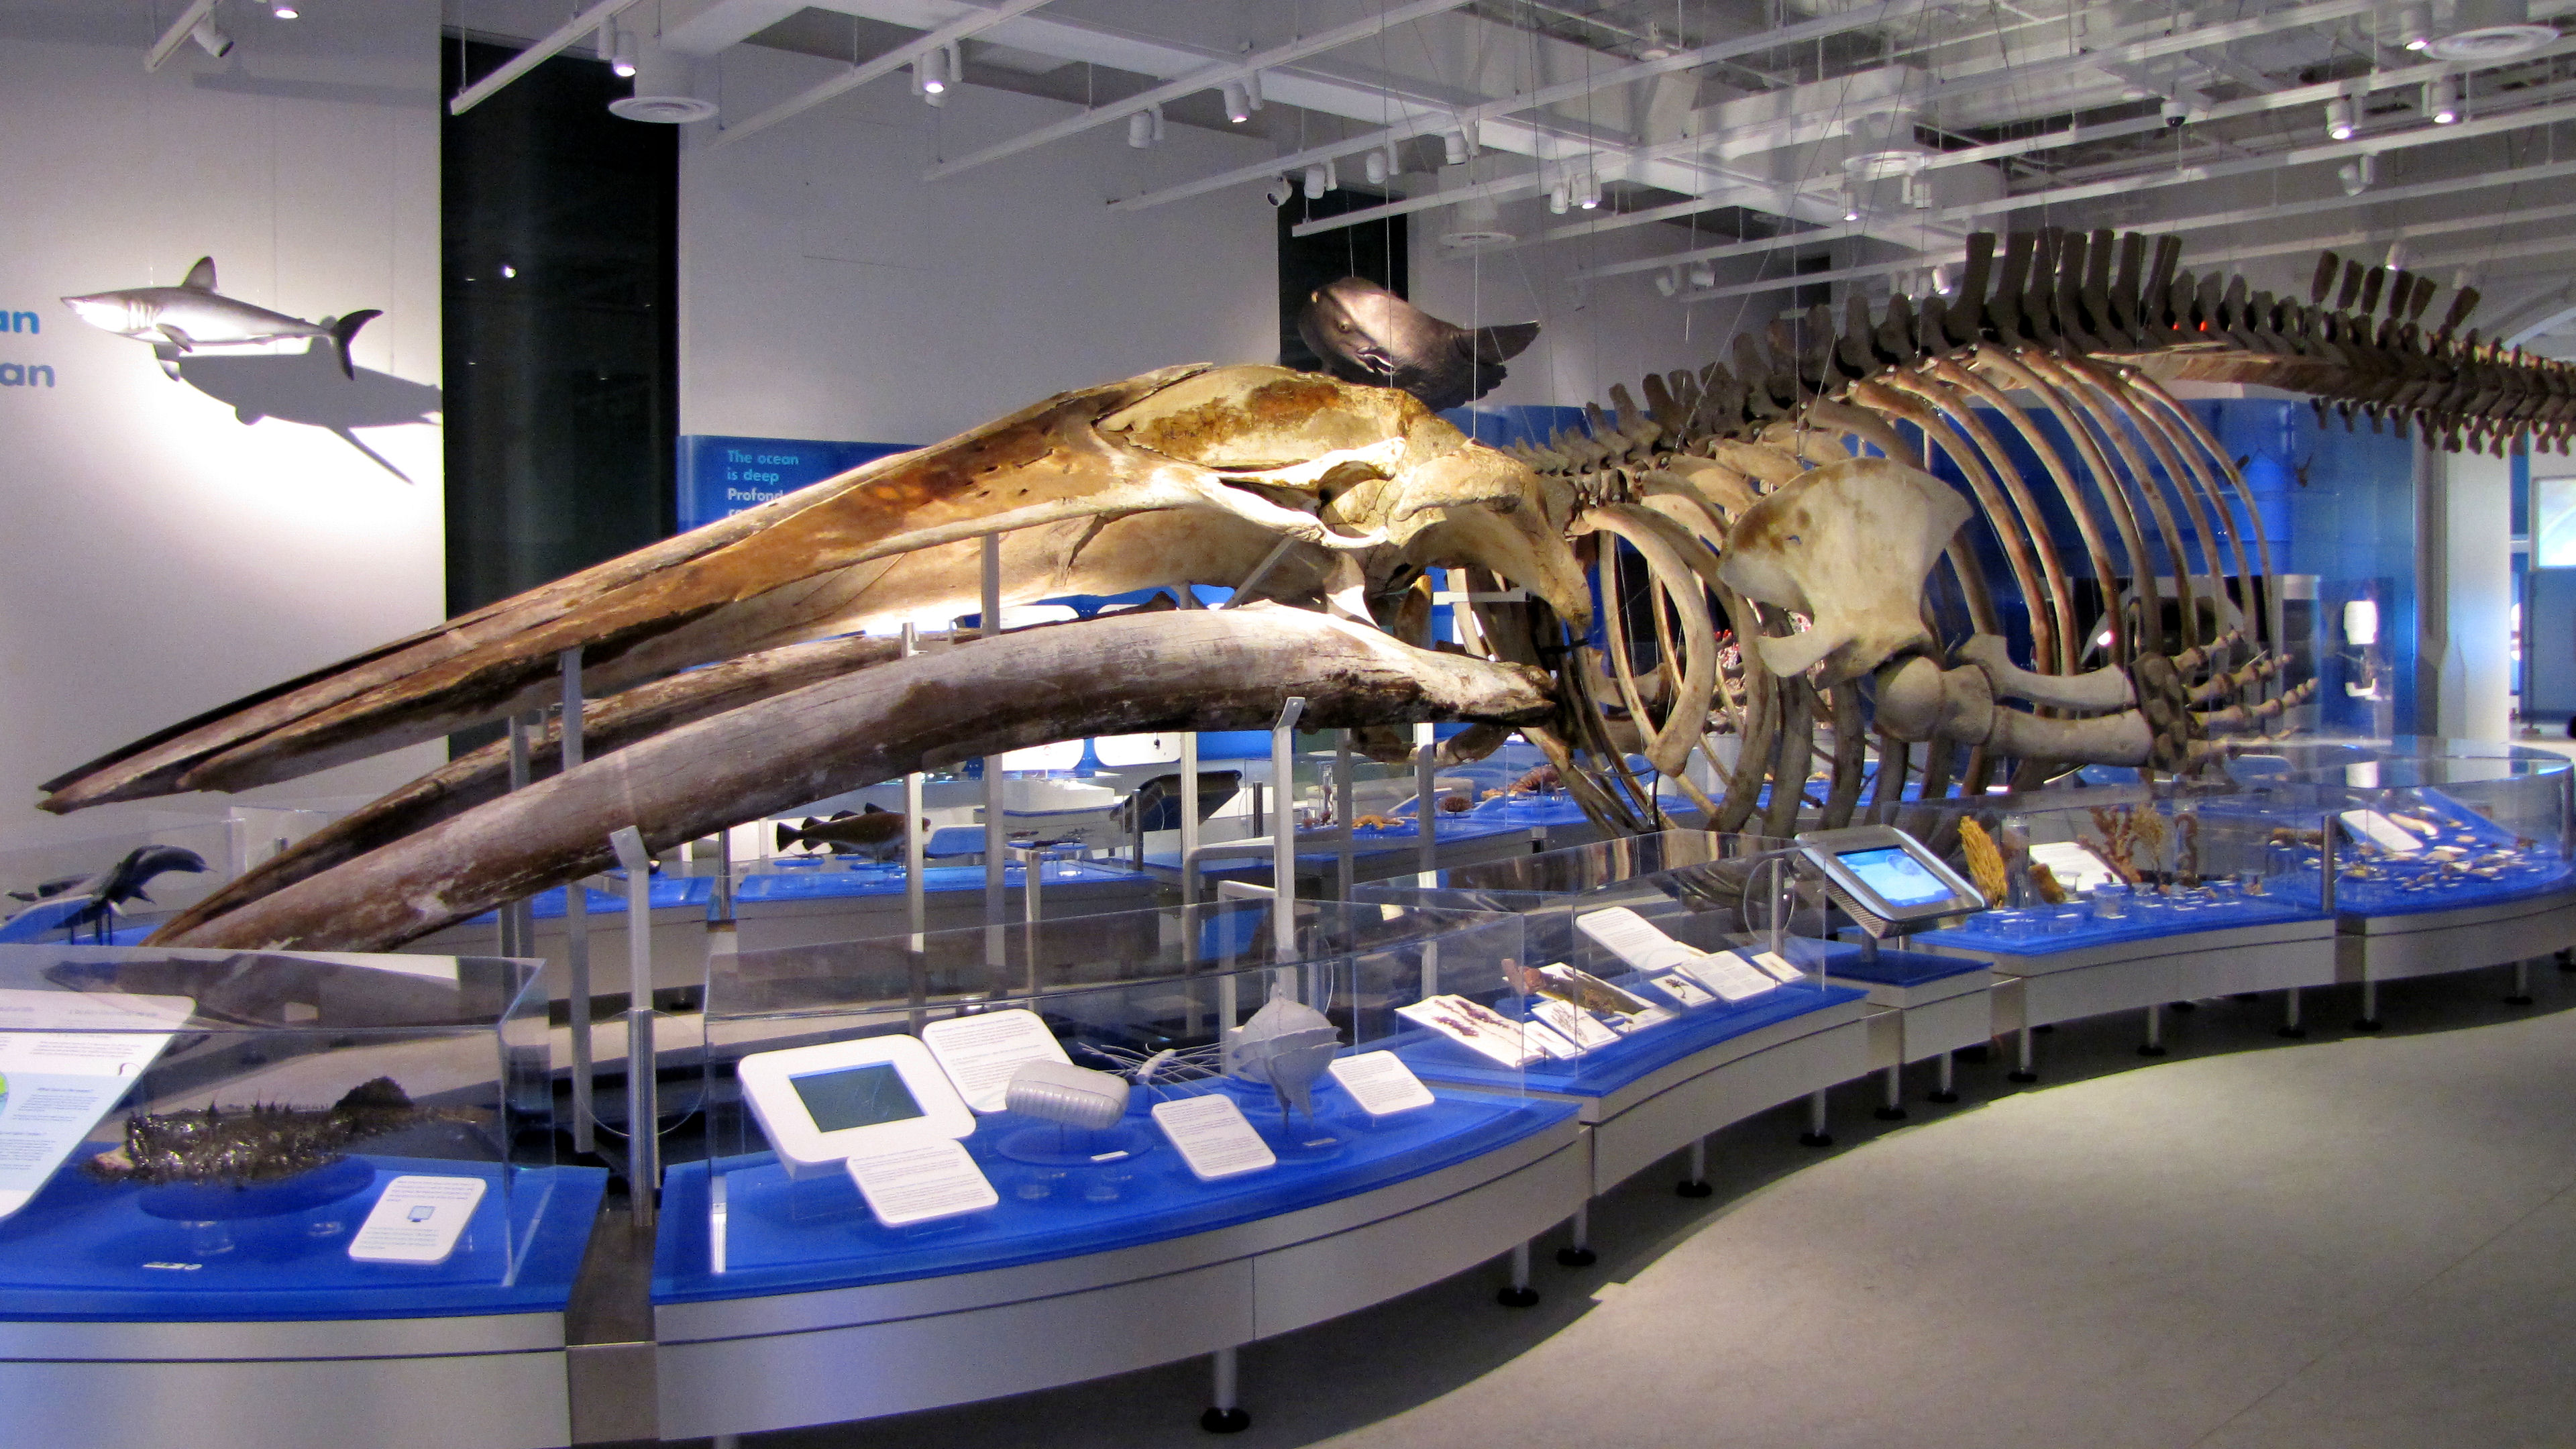 Blue_Whale_skeleton,_Canadian_Museum_of_Nature.jpg